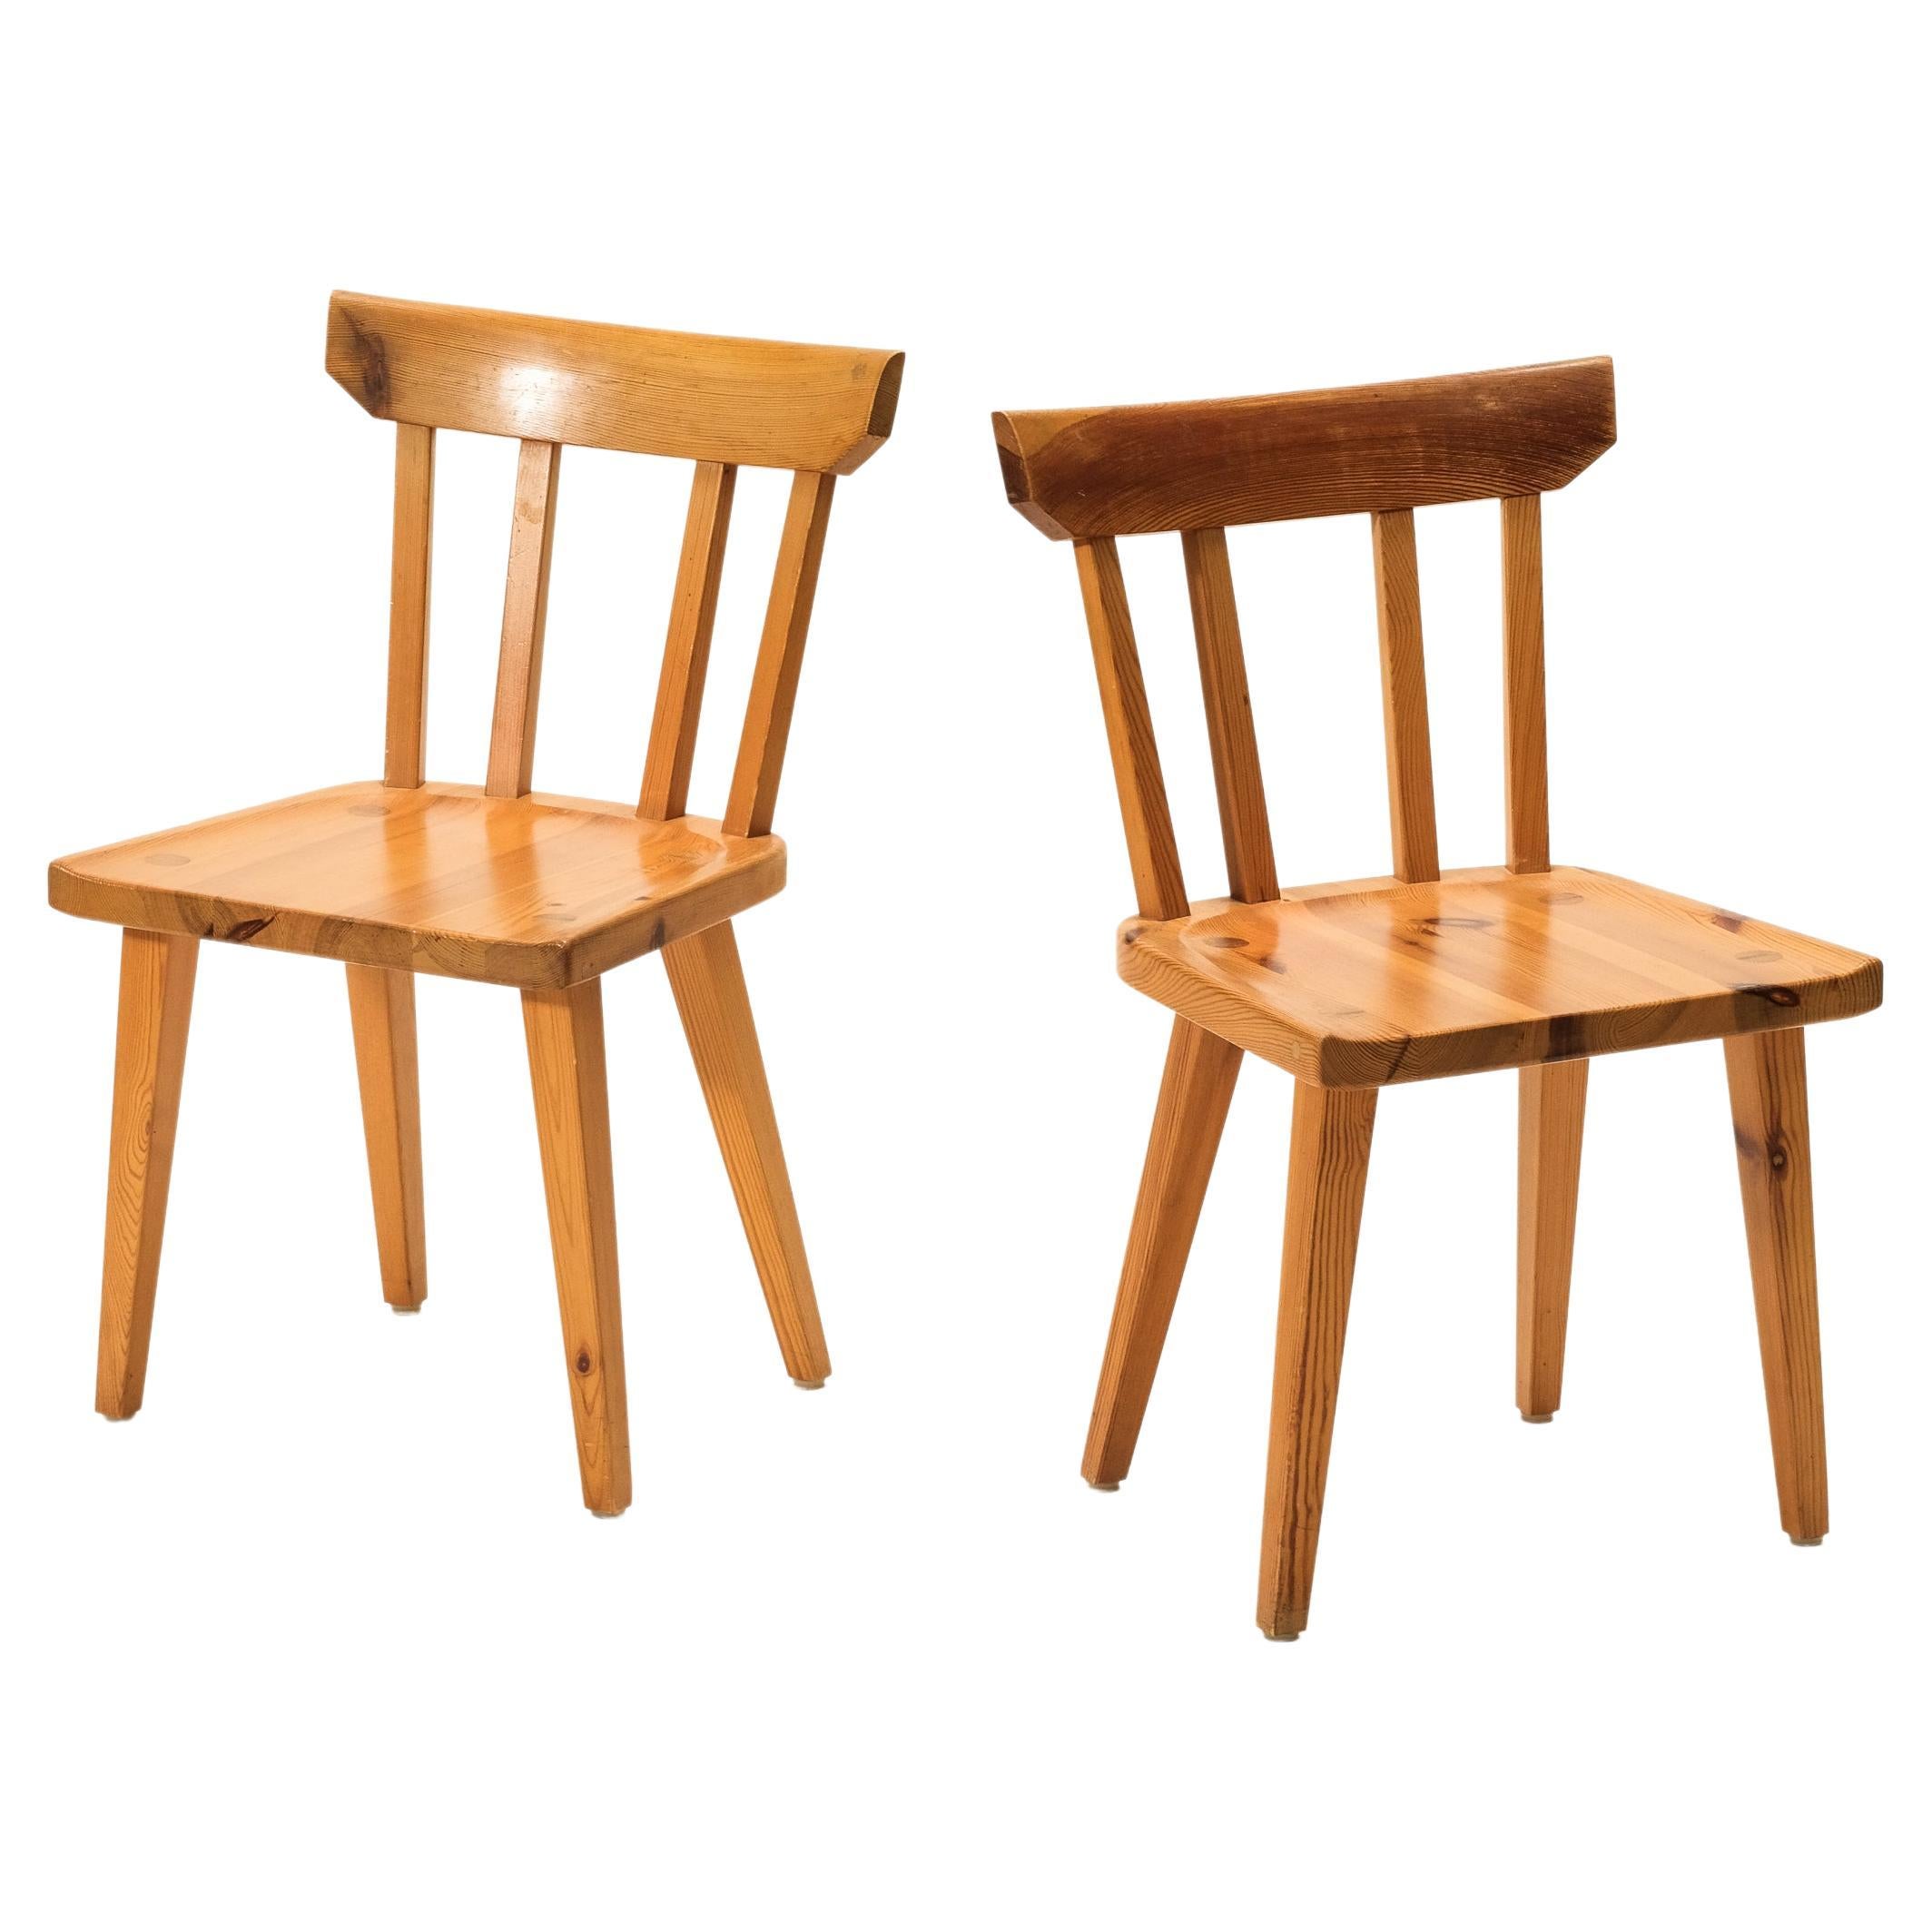 Pair of Pine Side Chairs by Göran Malmvall for Karl Andersson & Söner, 1970s For Sale